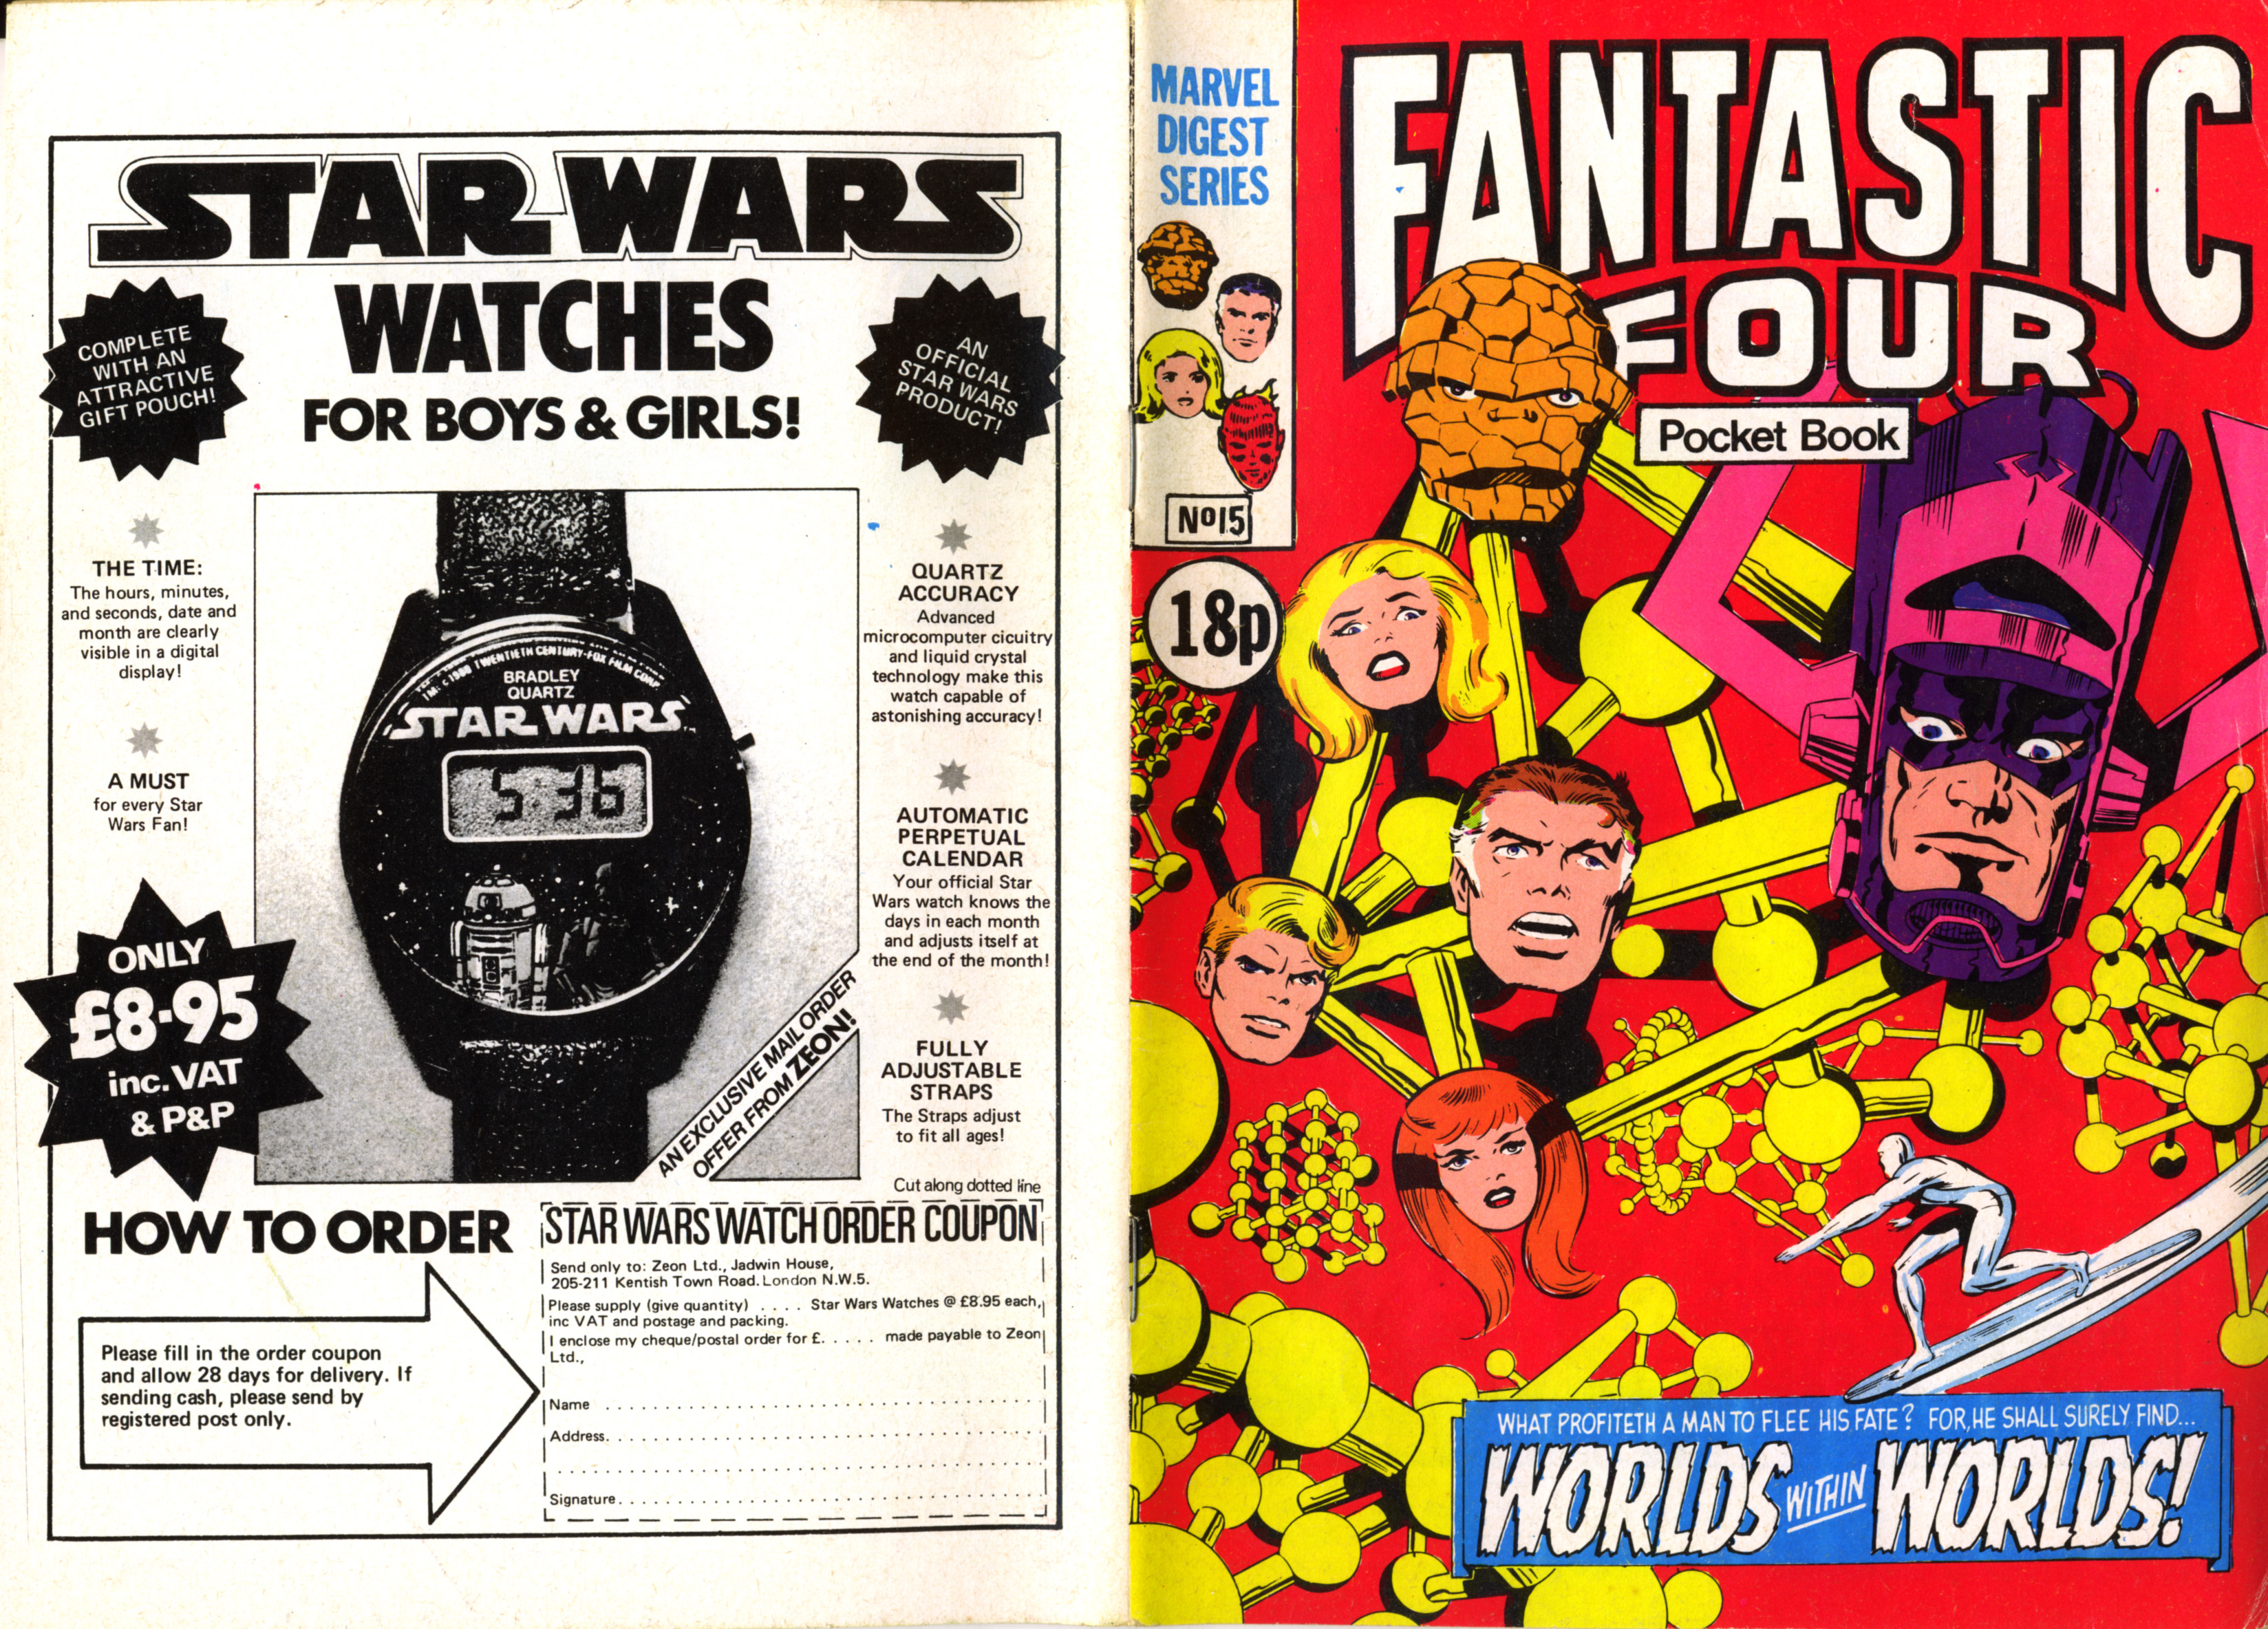 Read online Fantastic Four Pocket Book comic -  Issue #15 - 2